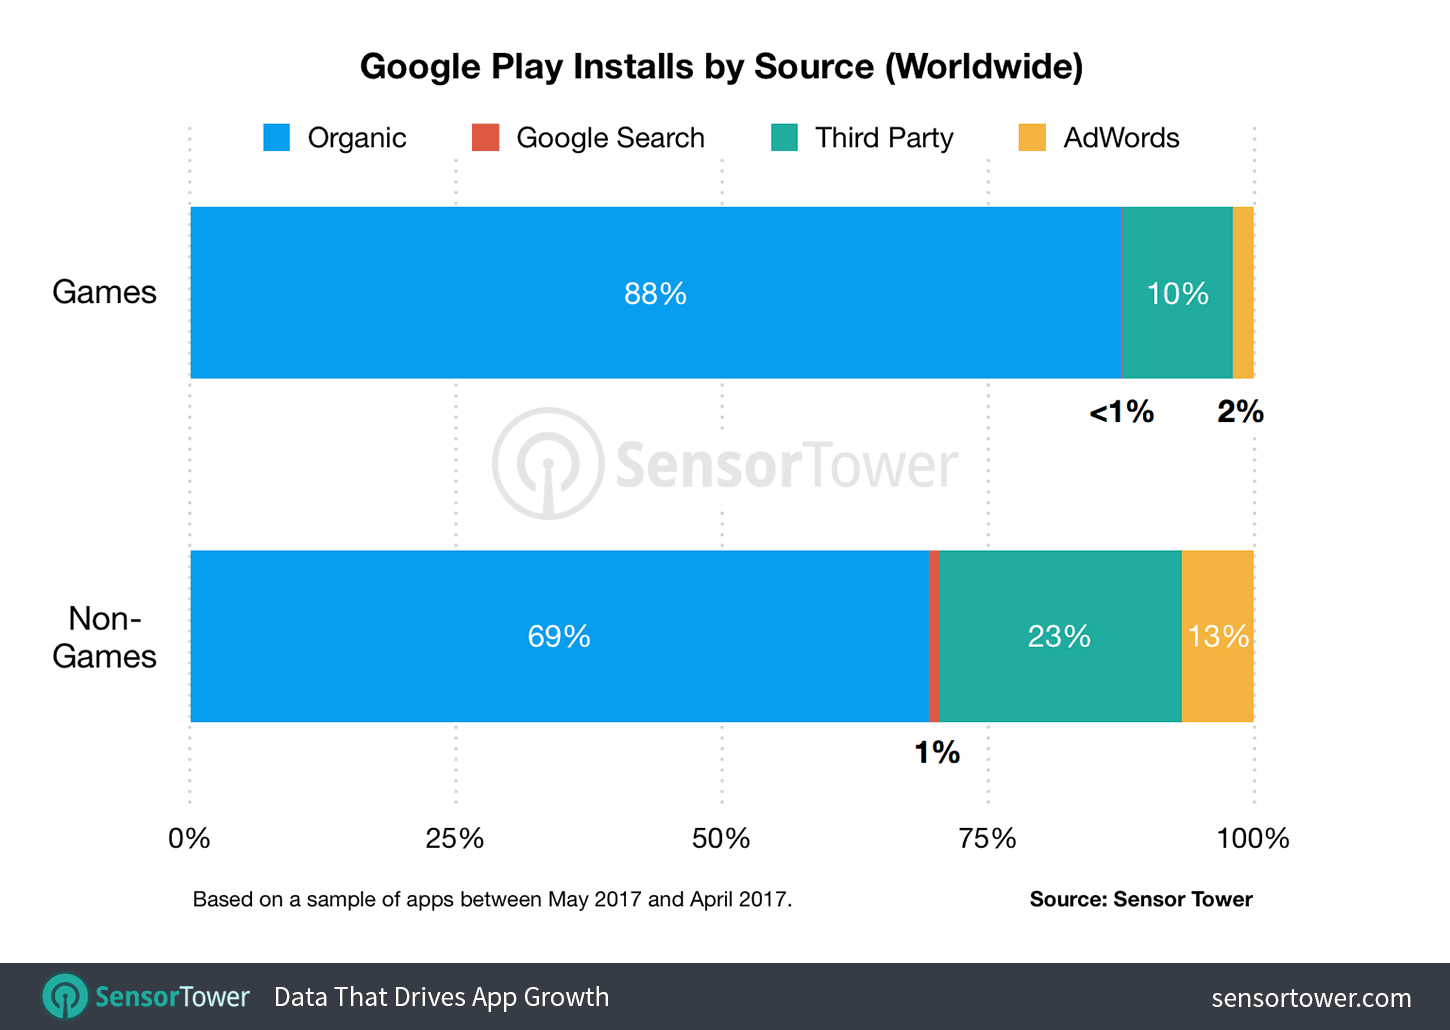 Google Play installs by source by Sensor Tower